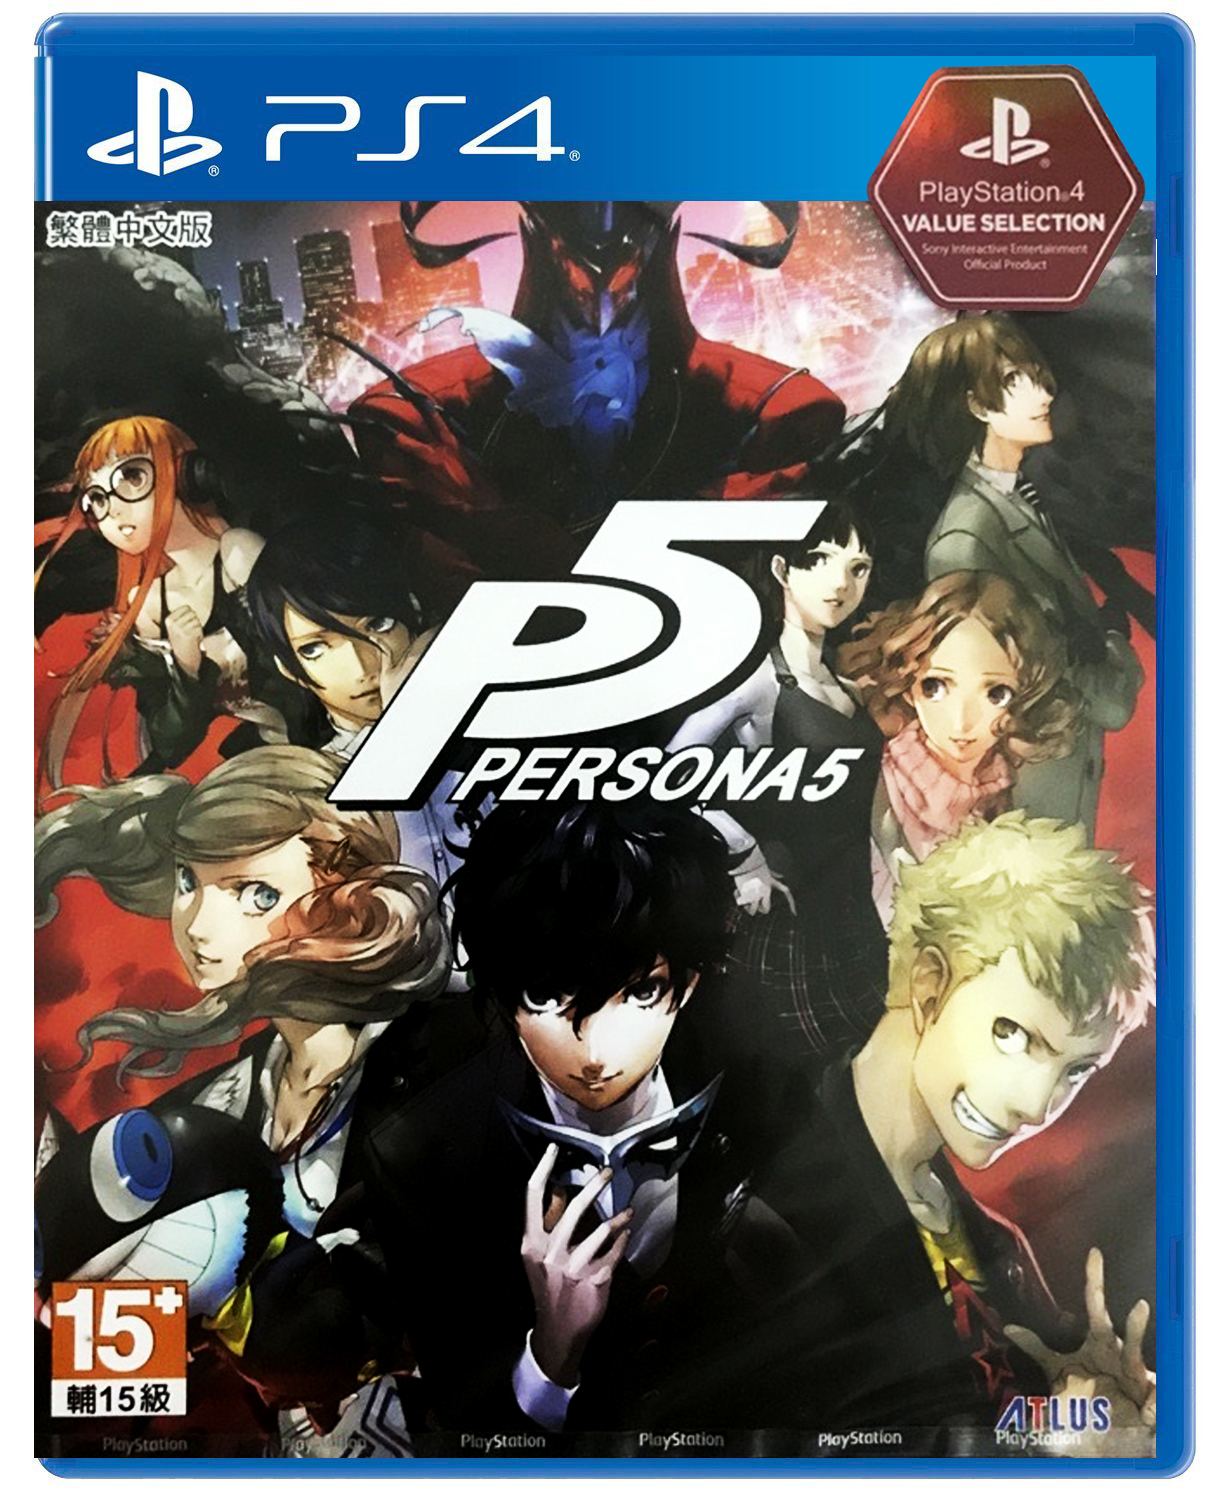 Persona 5 [Value Selection] (Chinese Subs) for PlayStation 4